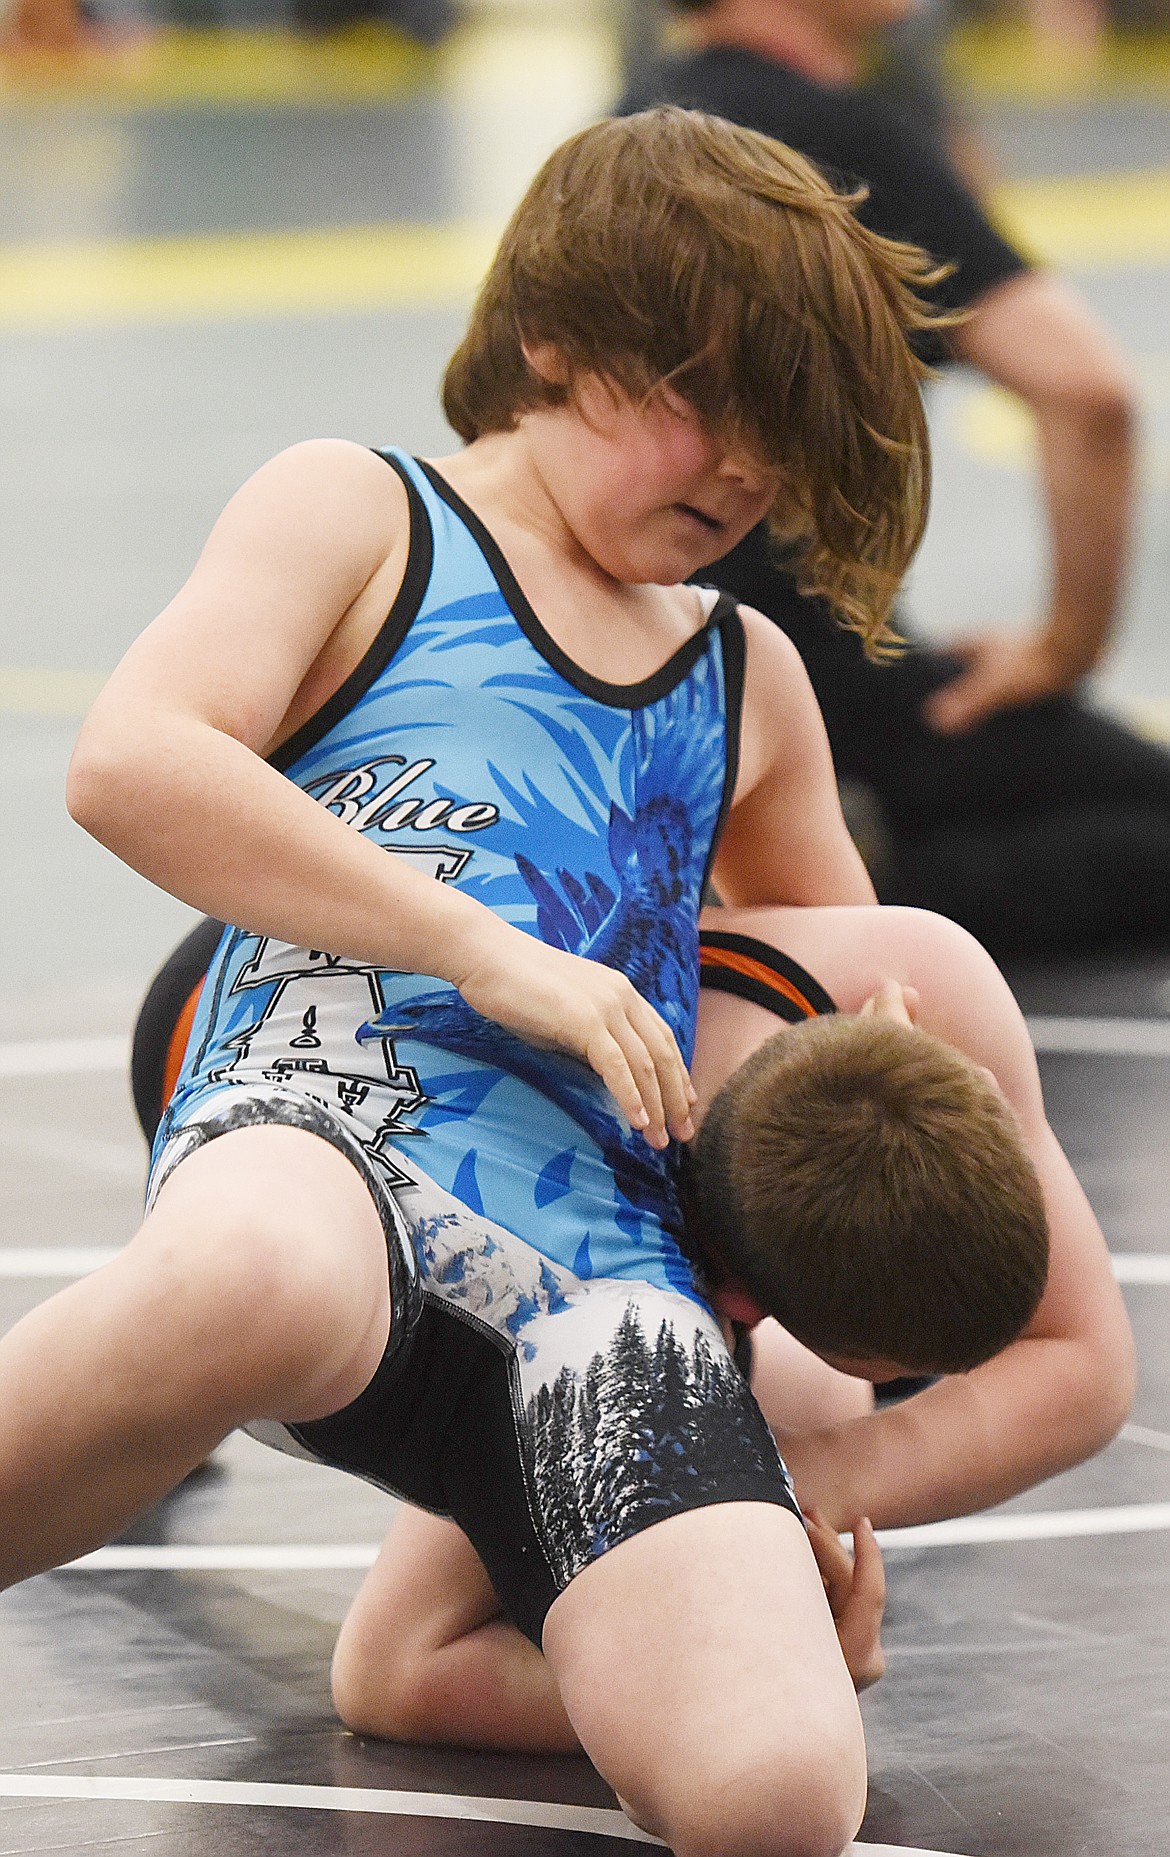 LIAM PALLISTER, in blue singlet, was the lone Thompson Falls wrestler at the WMLG state tourney. Pallister placed second in Novice 90.